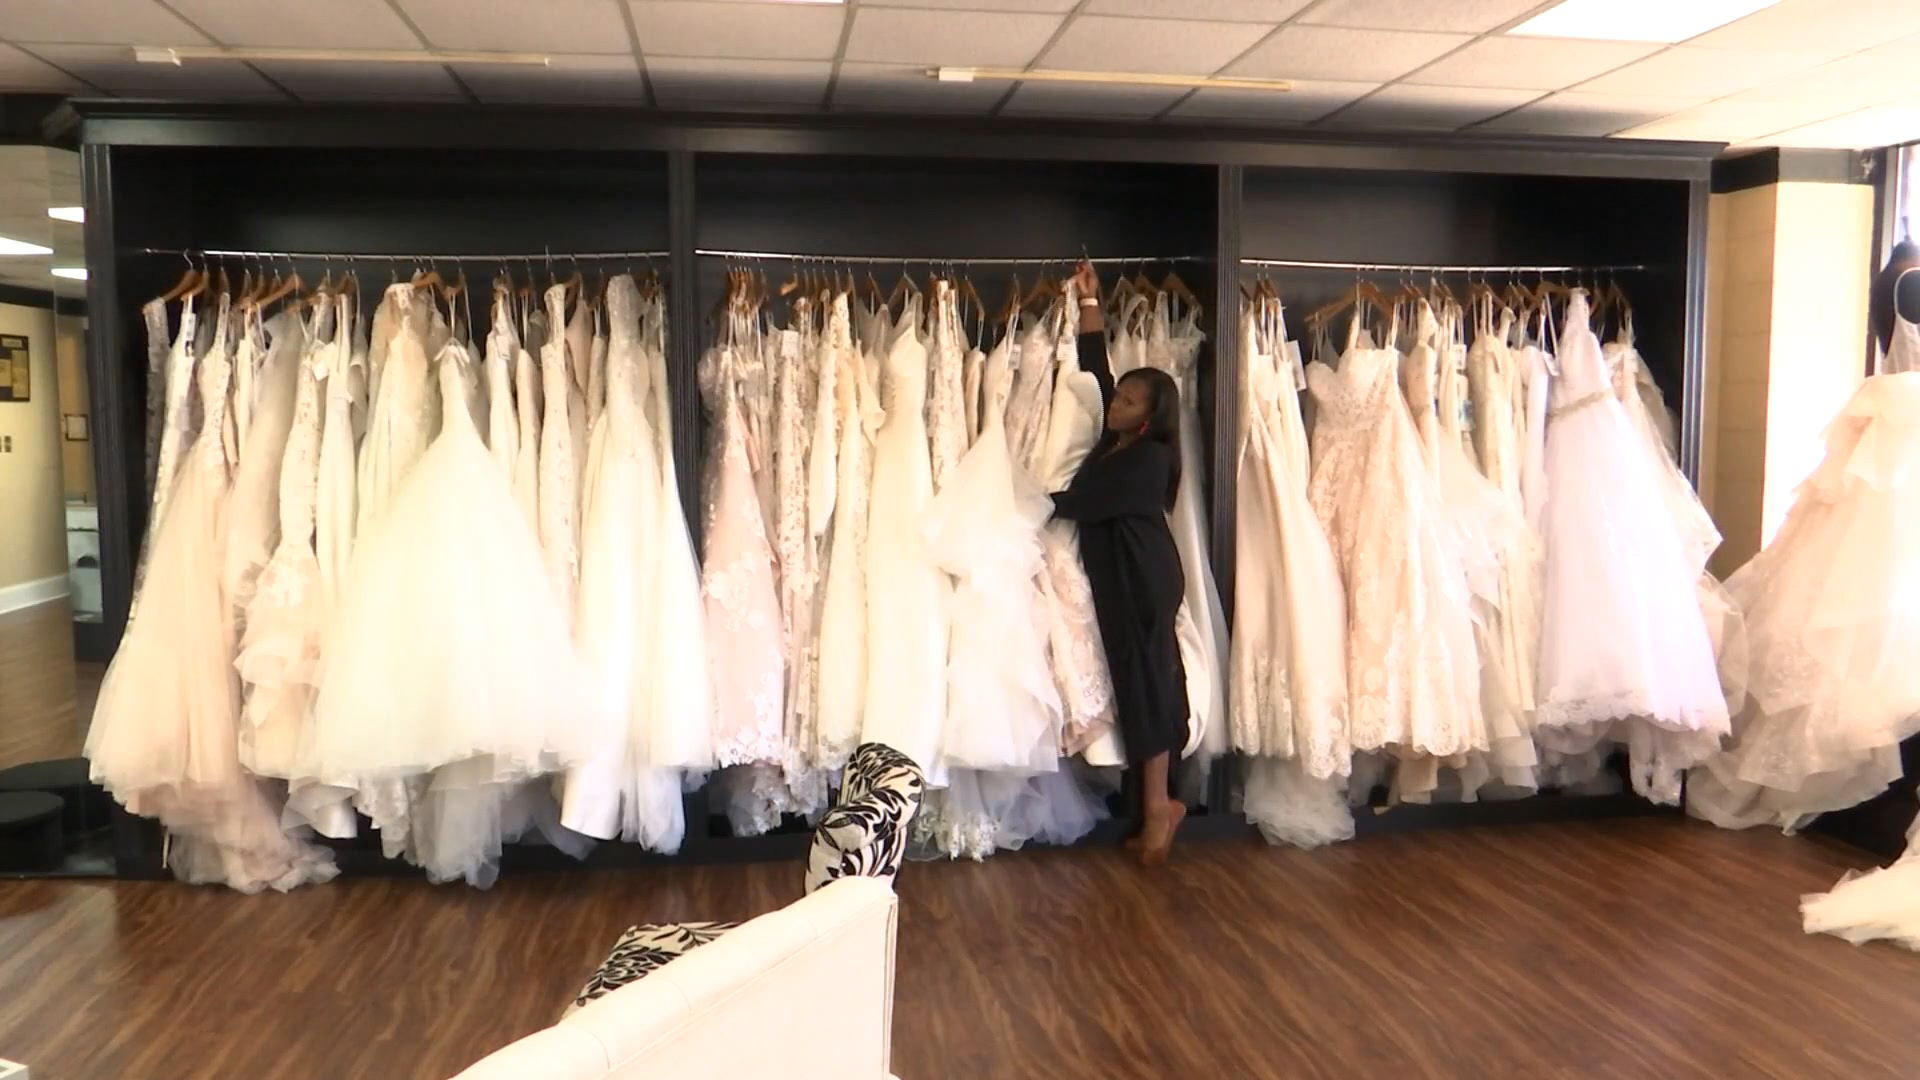 Headlines of a wedding dress shortage from the coronavirus have some brides on edge. But a Spartanburg, SC bridal shop says there's nothing to worry about.